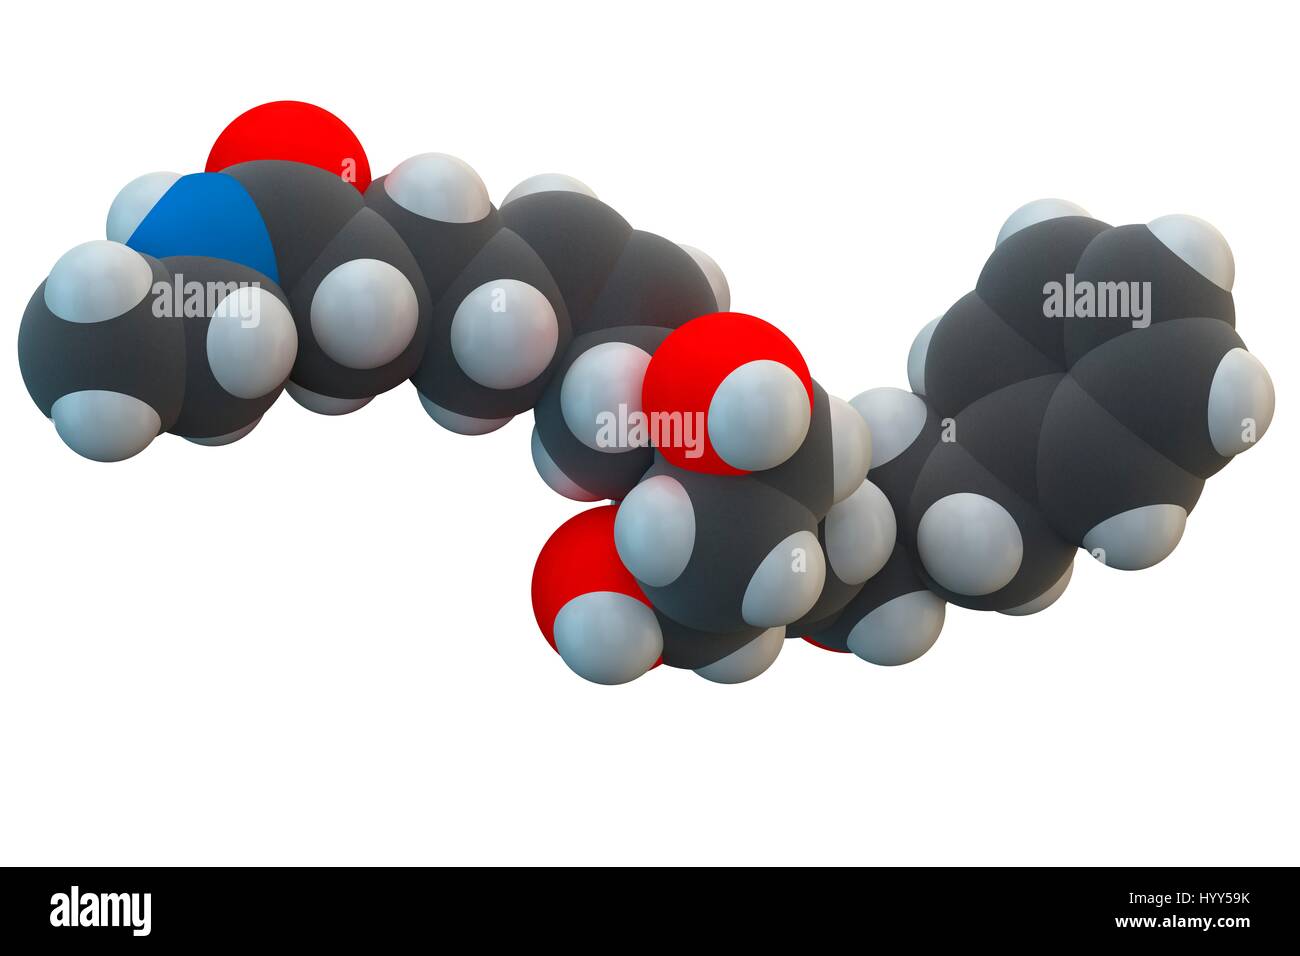 Bimatoprost drug molecule. This prostaglandin analogue is sold under the brand name Lumigan. It is used to control the progression of glaucoma and in the management of ocular hypertension. Chemical formula is C25H37NO4. Atoms are represented as spheres: carbon (grey), hydrogen (white), nitrogen (blue), oxygen (red). Illustration. Stock Photo